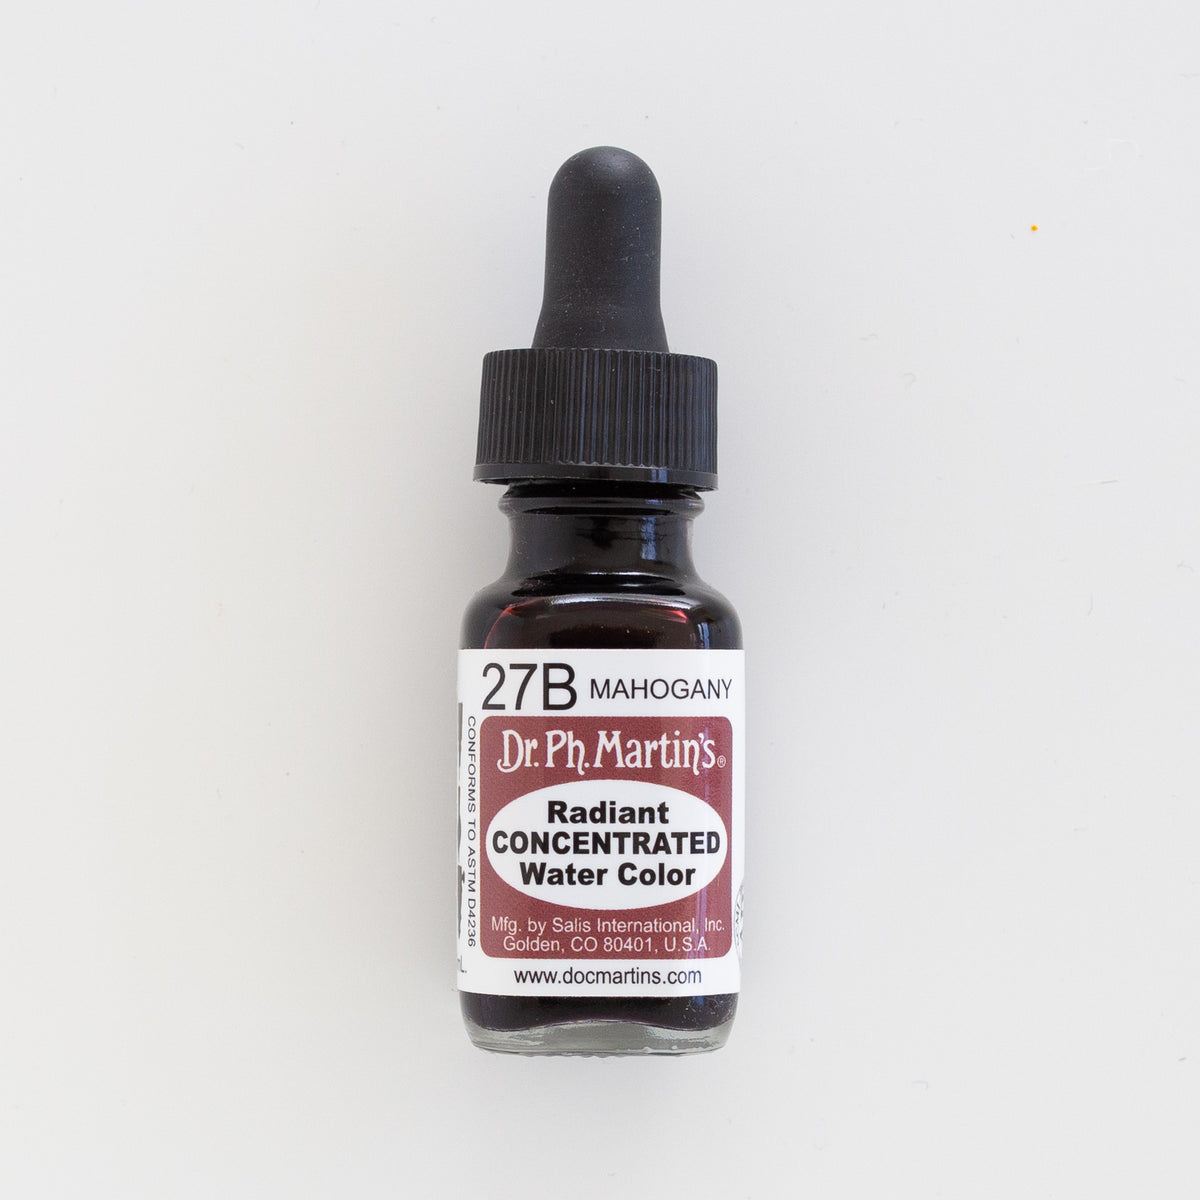 Dr. Ph. Martin’s Radiant Concentrated 27B Mahogany